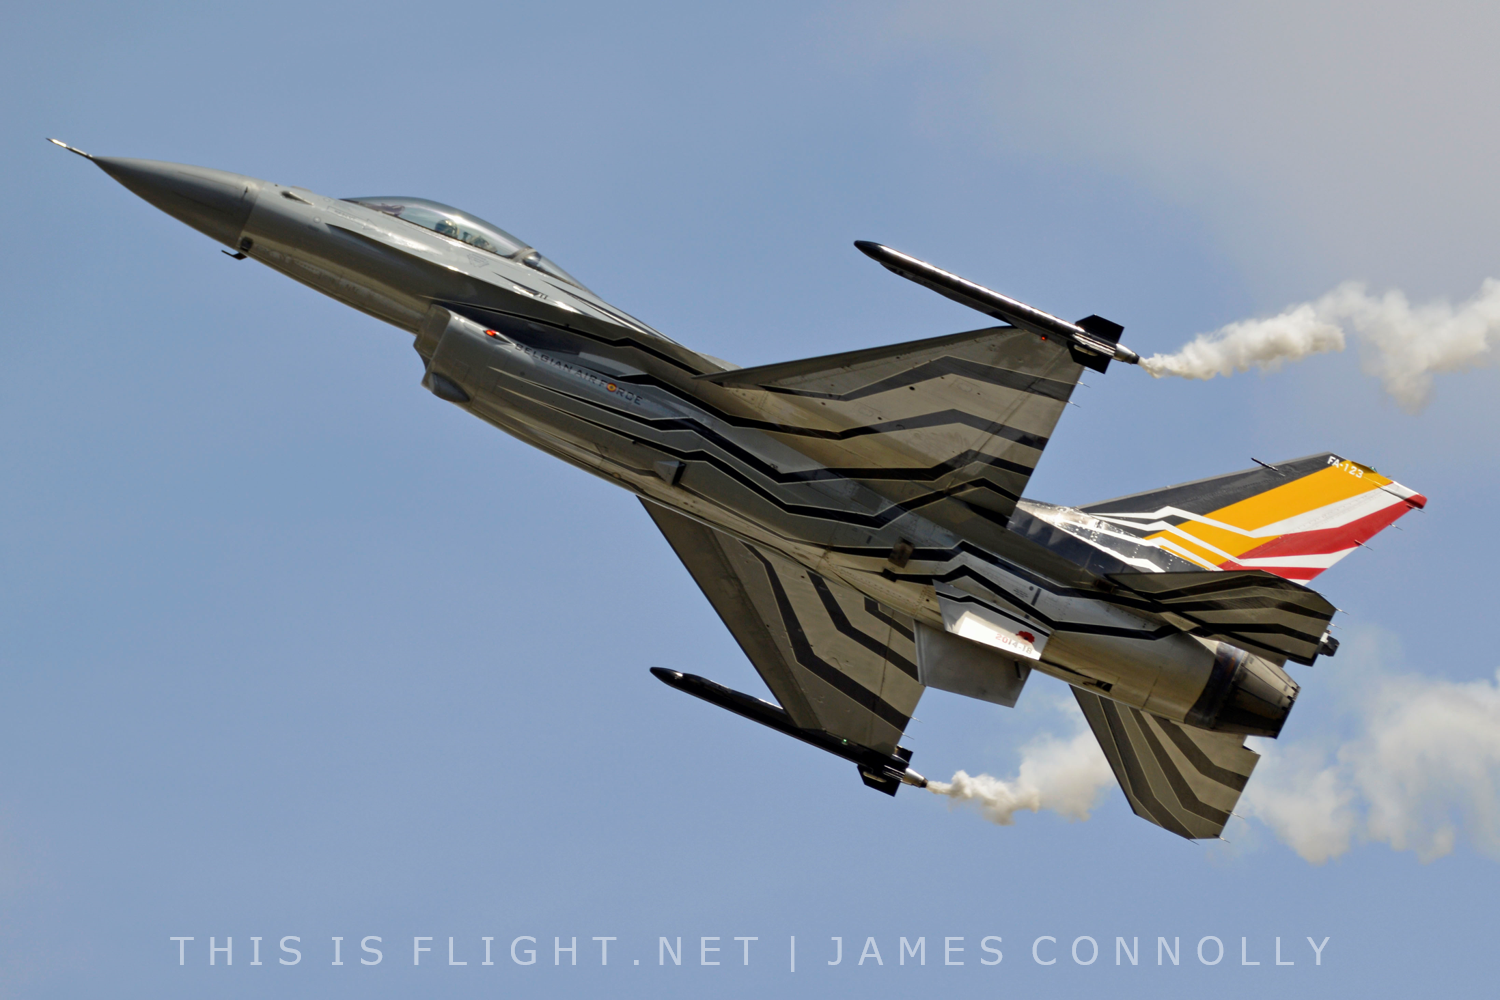 Guide to the Royal International Air Tattoo (RIAT) - This is Flight